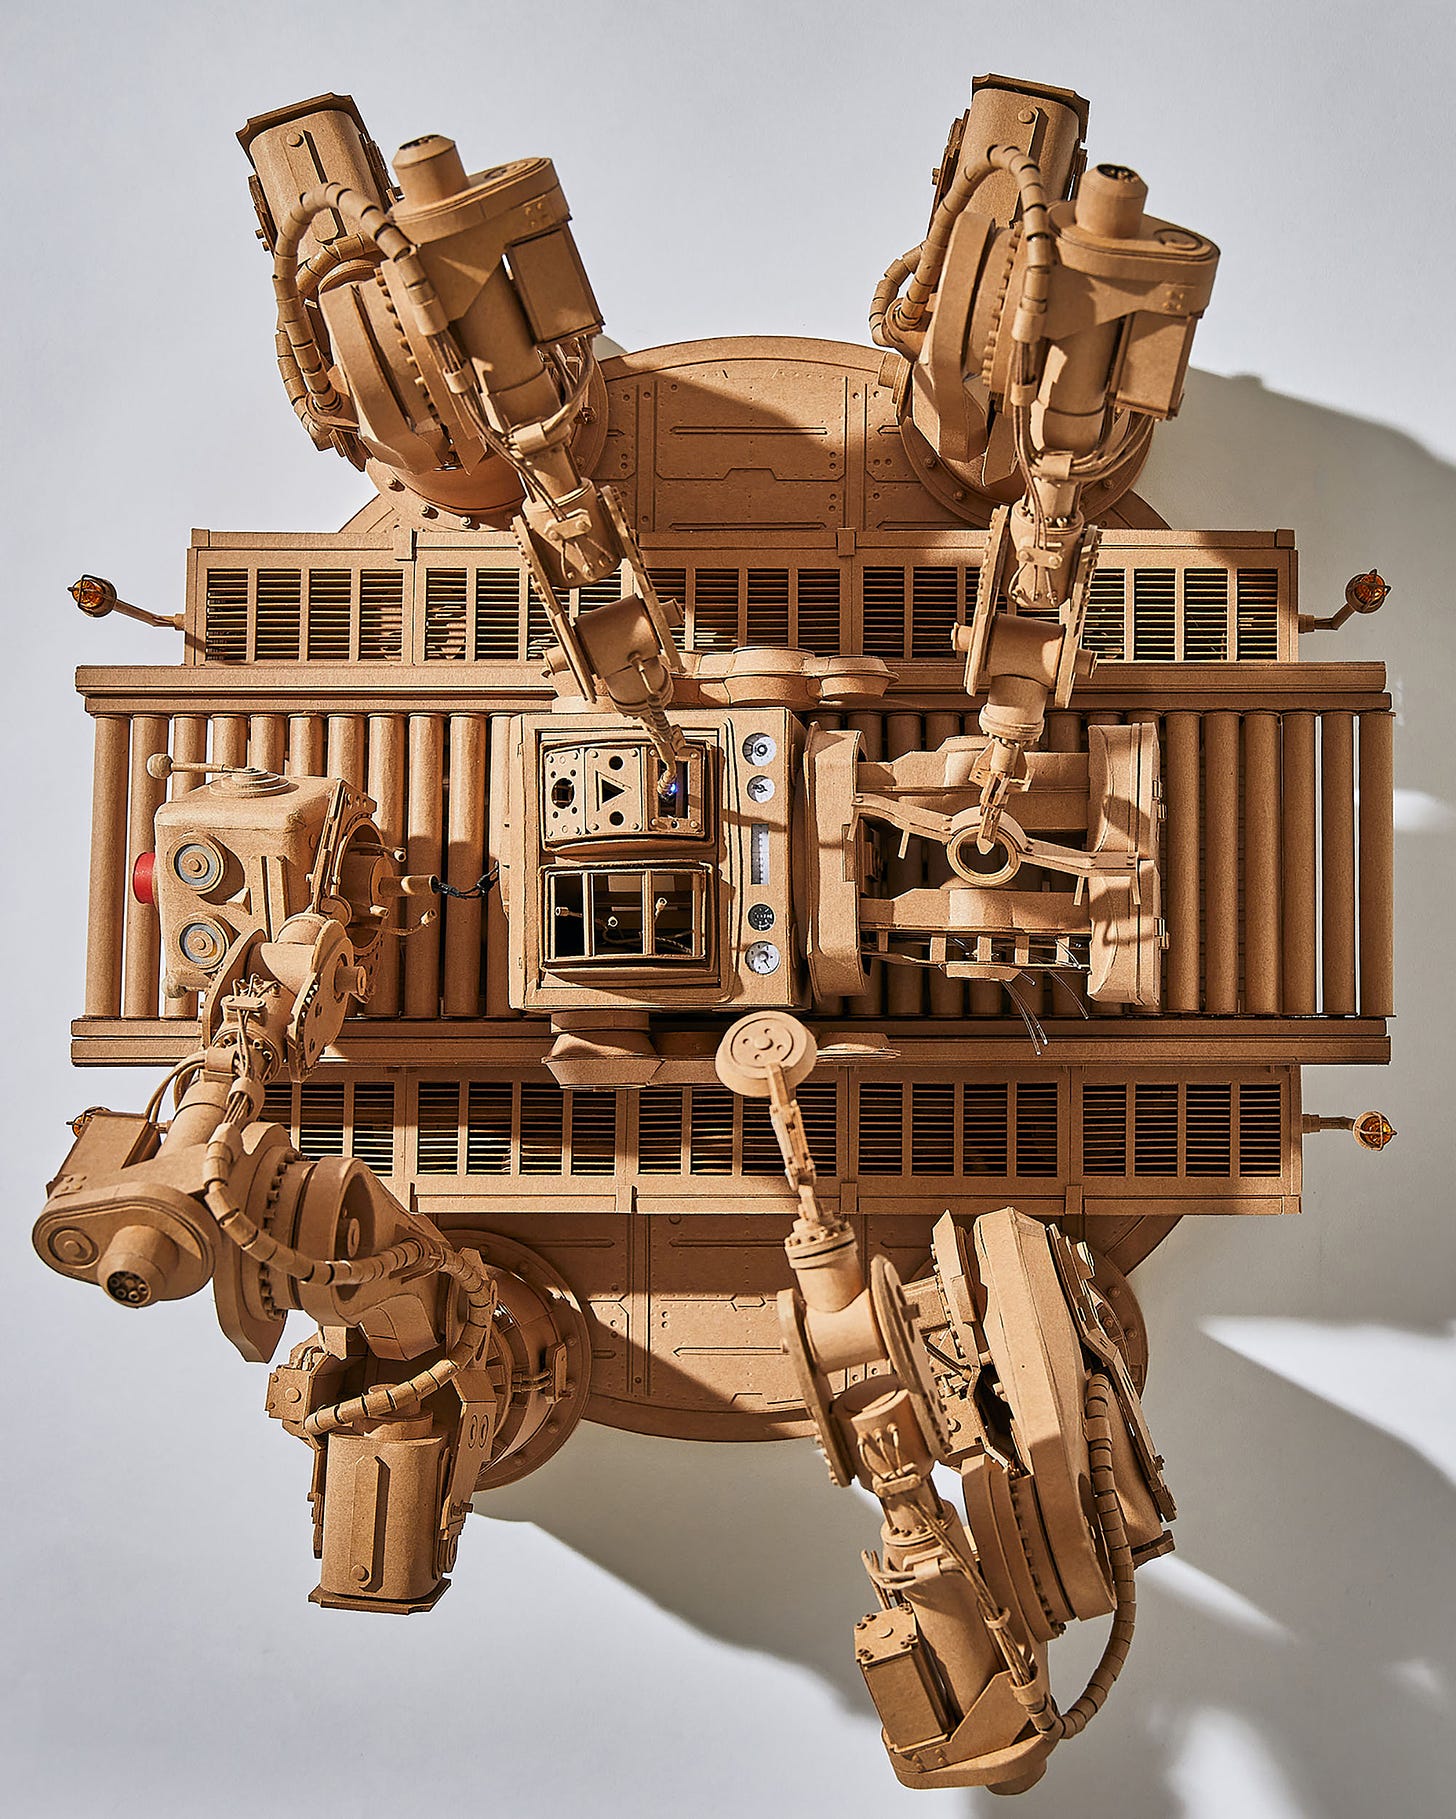 A Plant Overruns an Incredibly Intricate Cardboard Universe for Robots by Greg  Olijnyk | Colossal